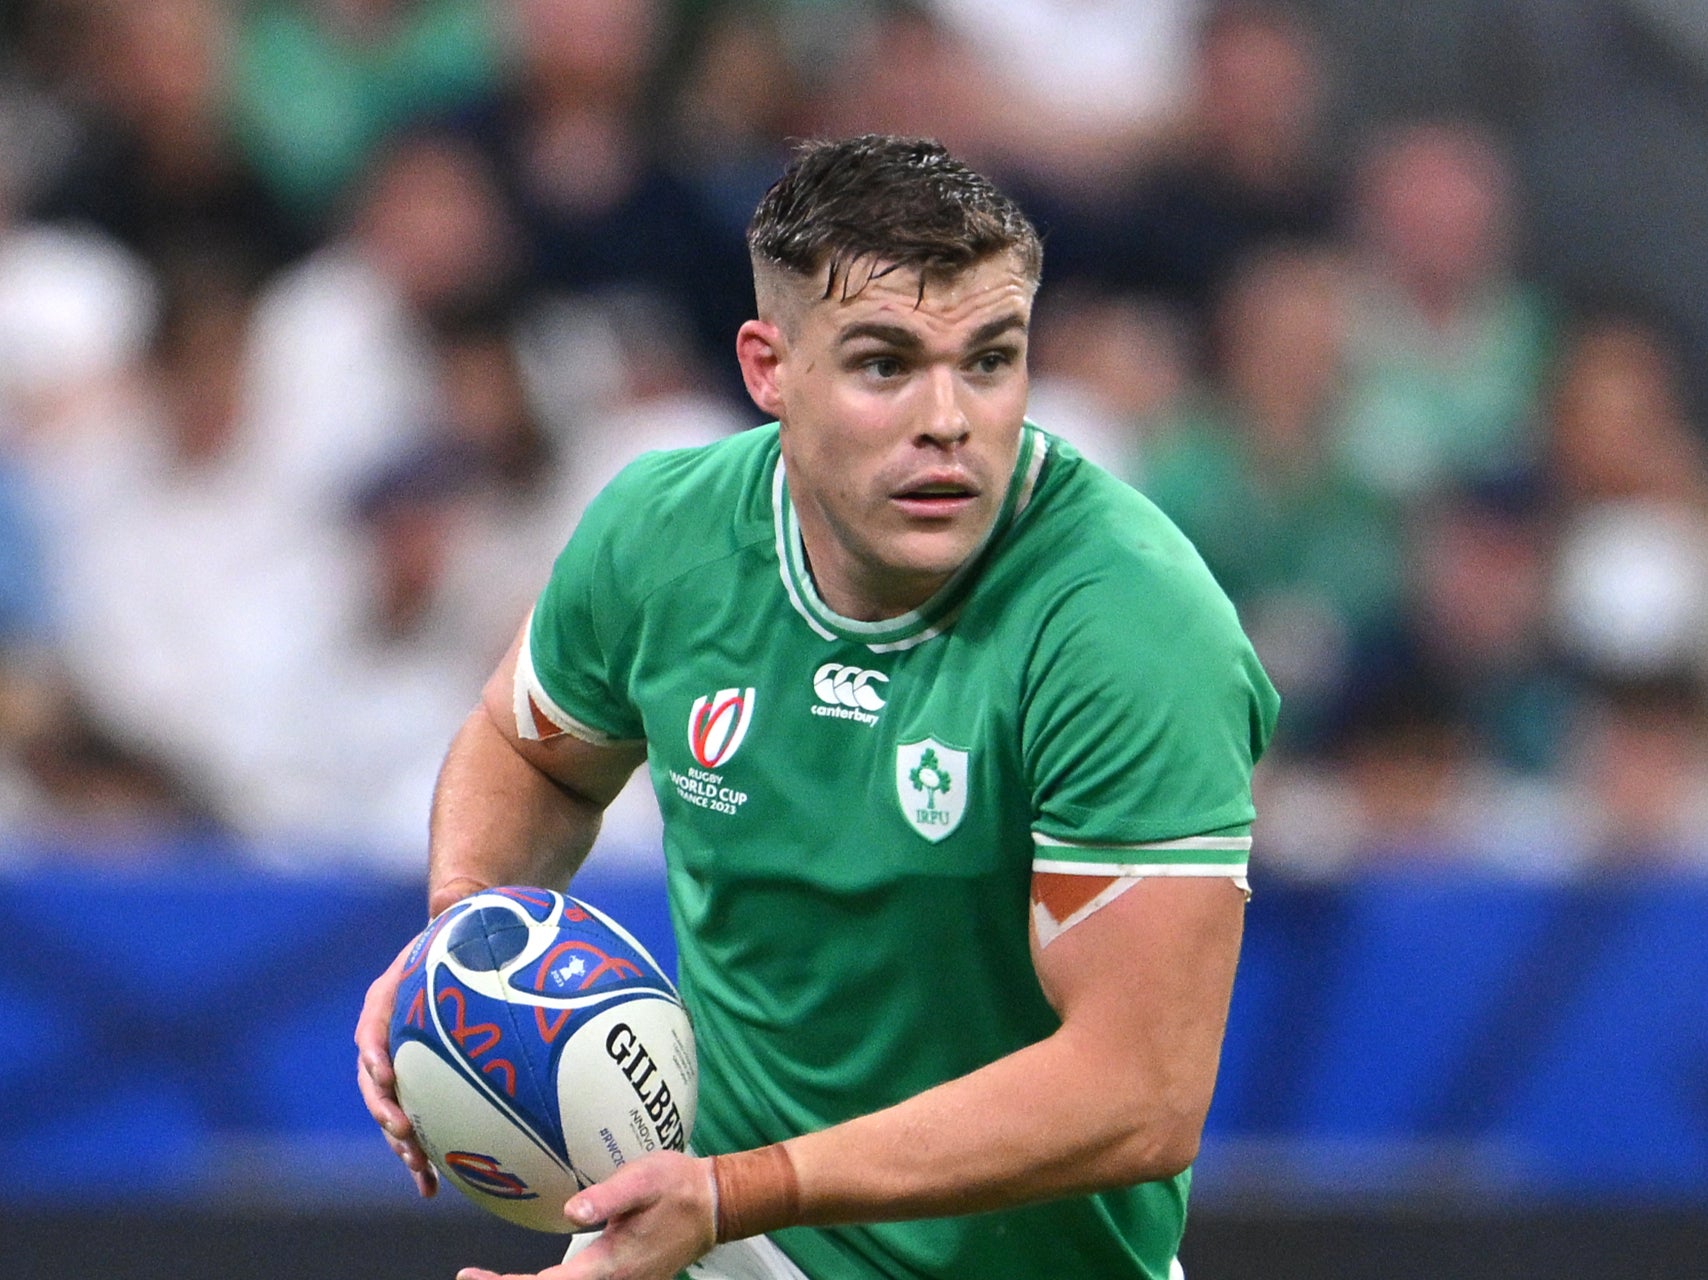 Jack Crowley will step up to fill the boots of Irish talisman Johnny Sexton